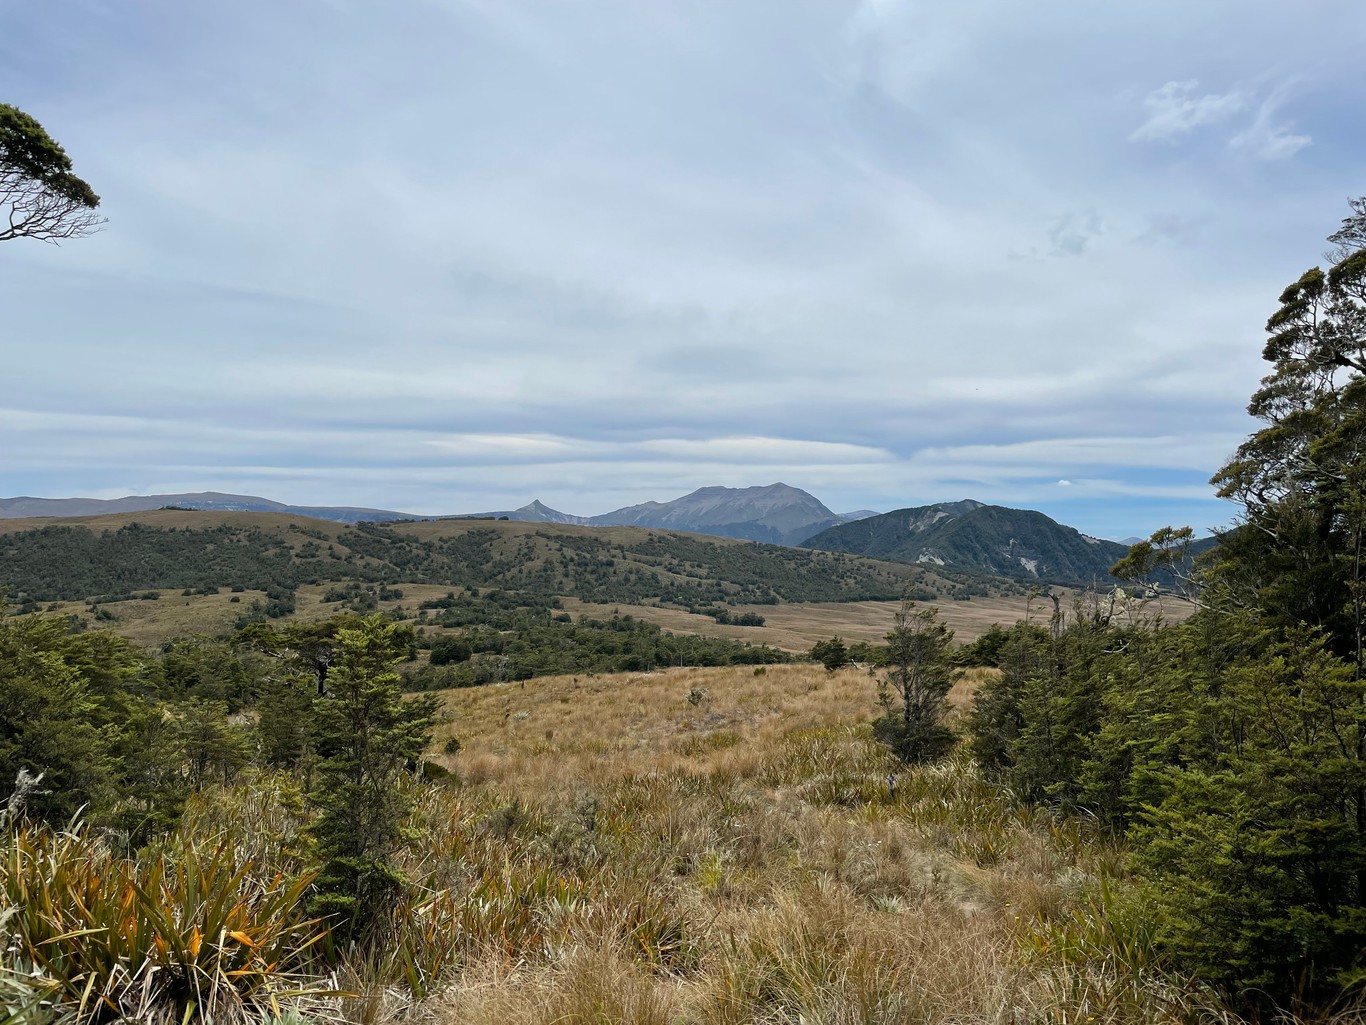 A wide alpine plateau with tussocks and sparse forest, with distant peaks